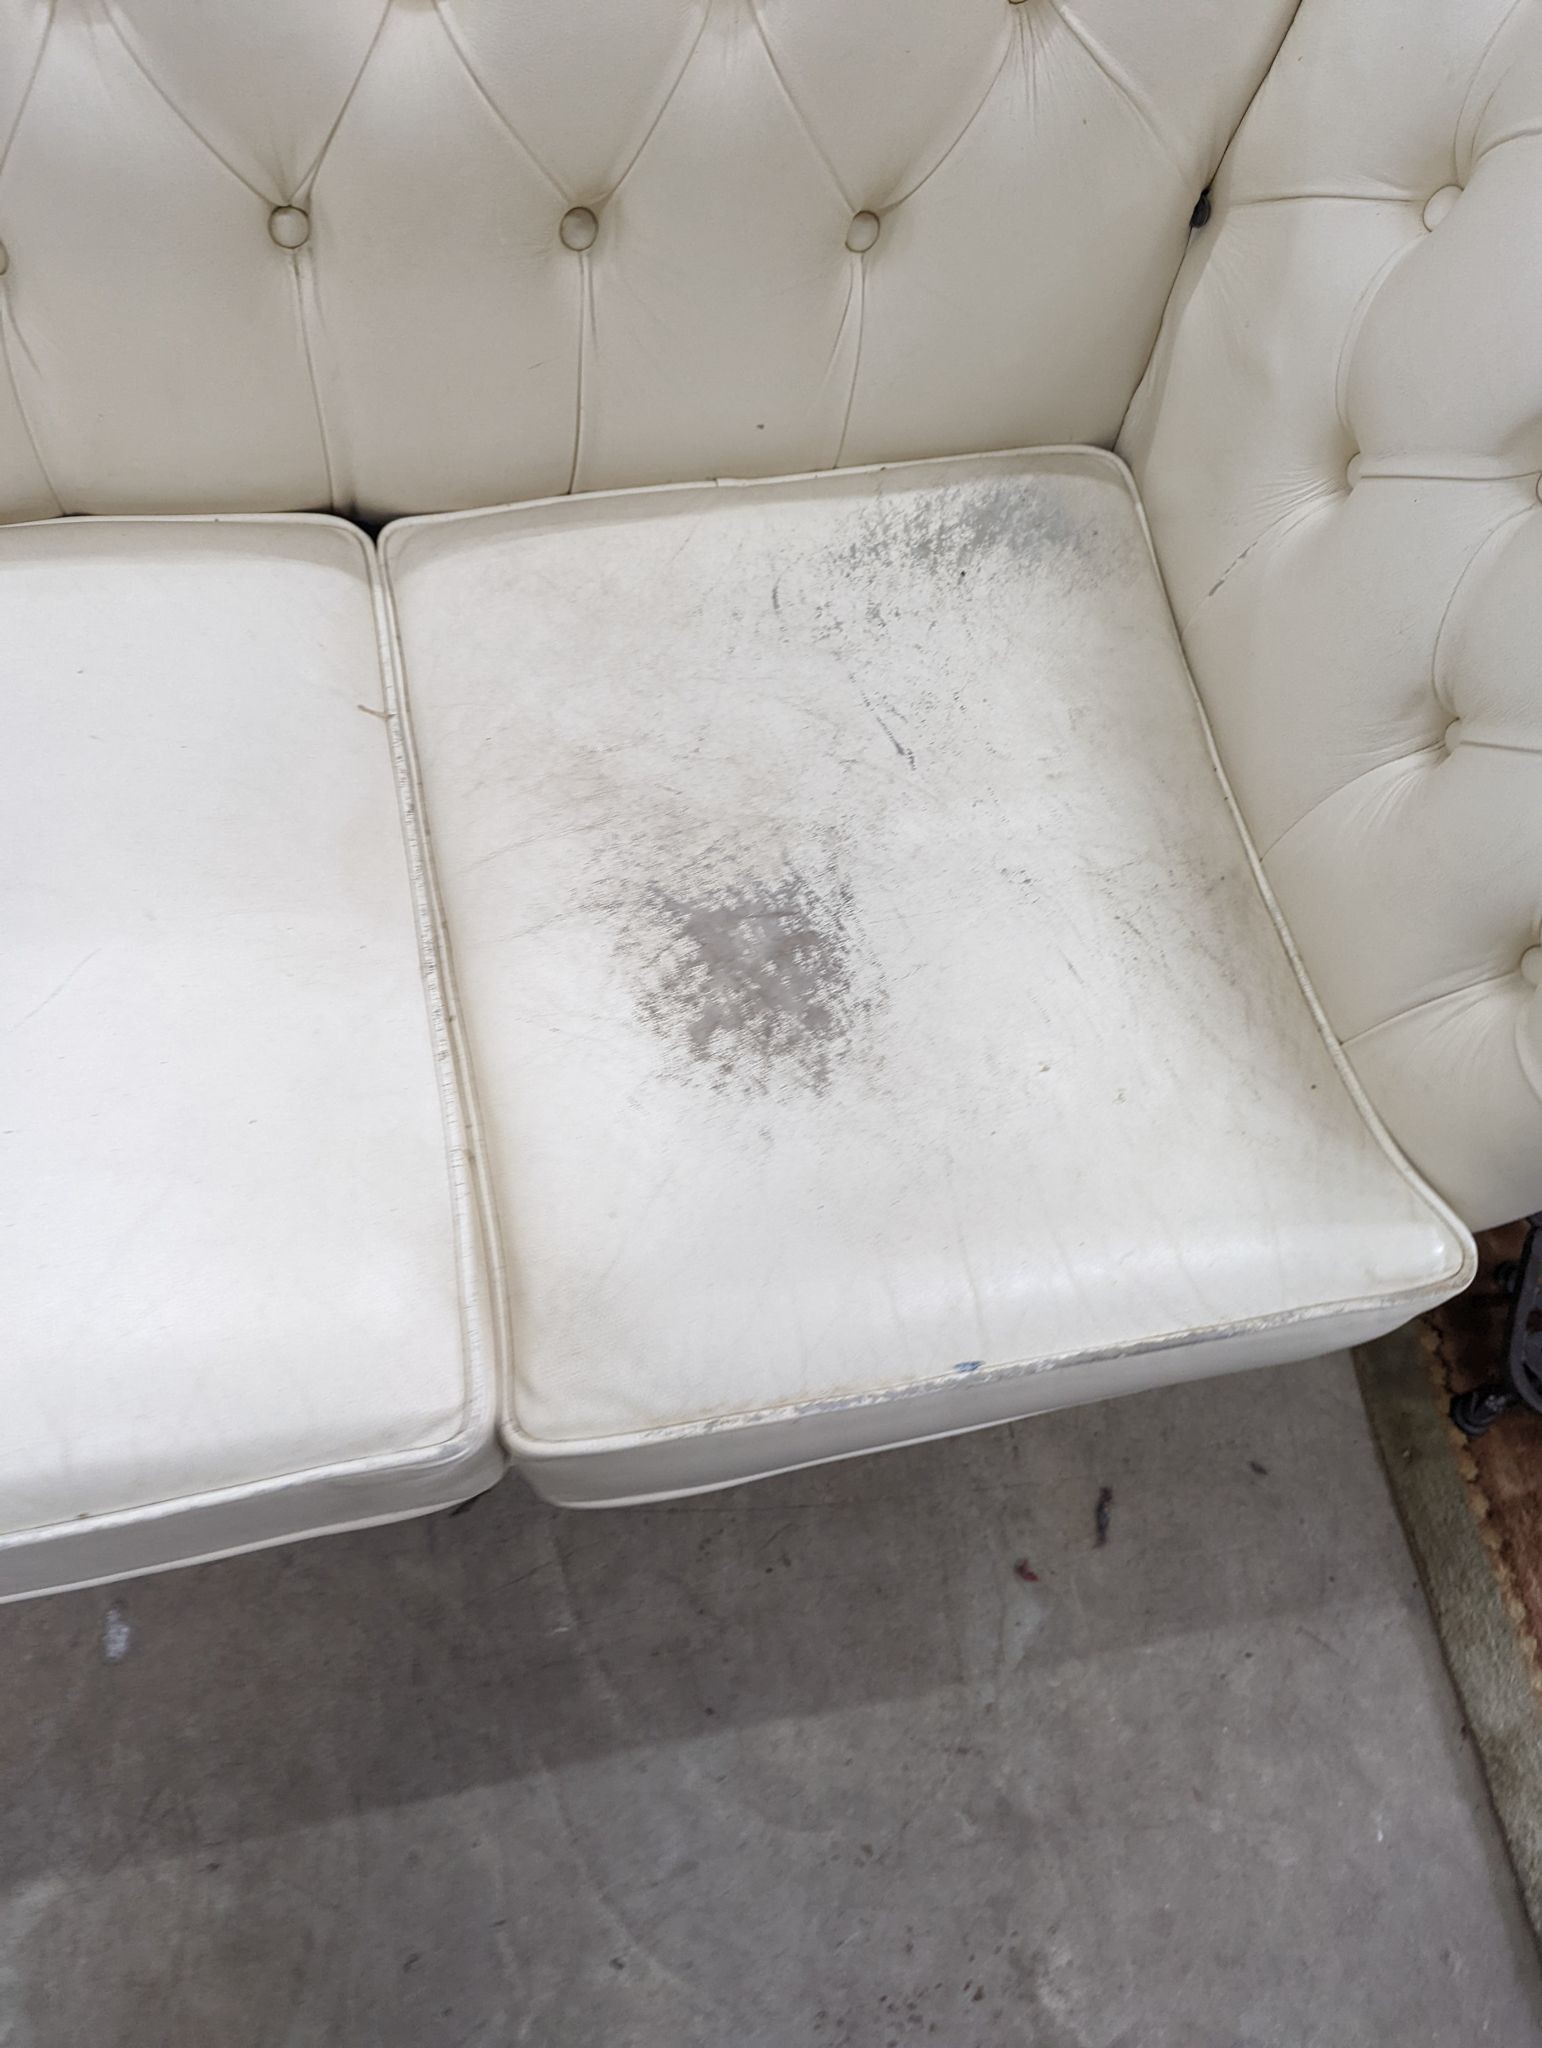 A Victorian style buttoned white leather Chesterfield settee, length 190cm, depth 86cm, height 72cm